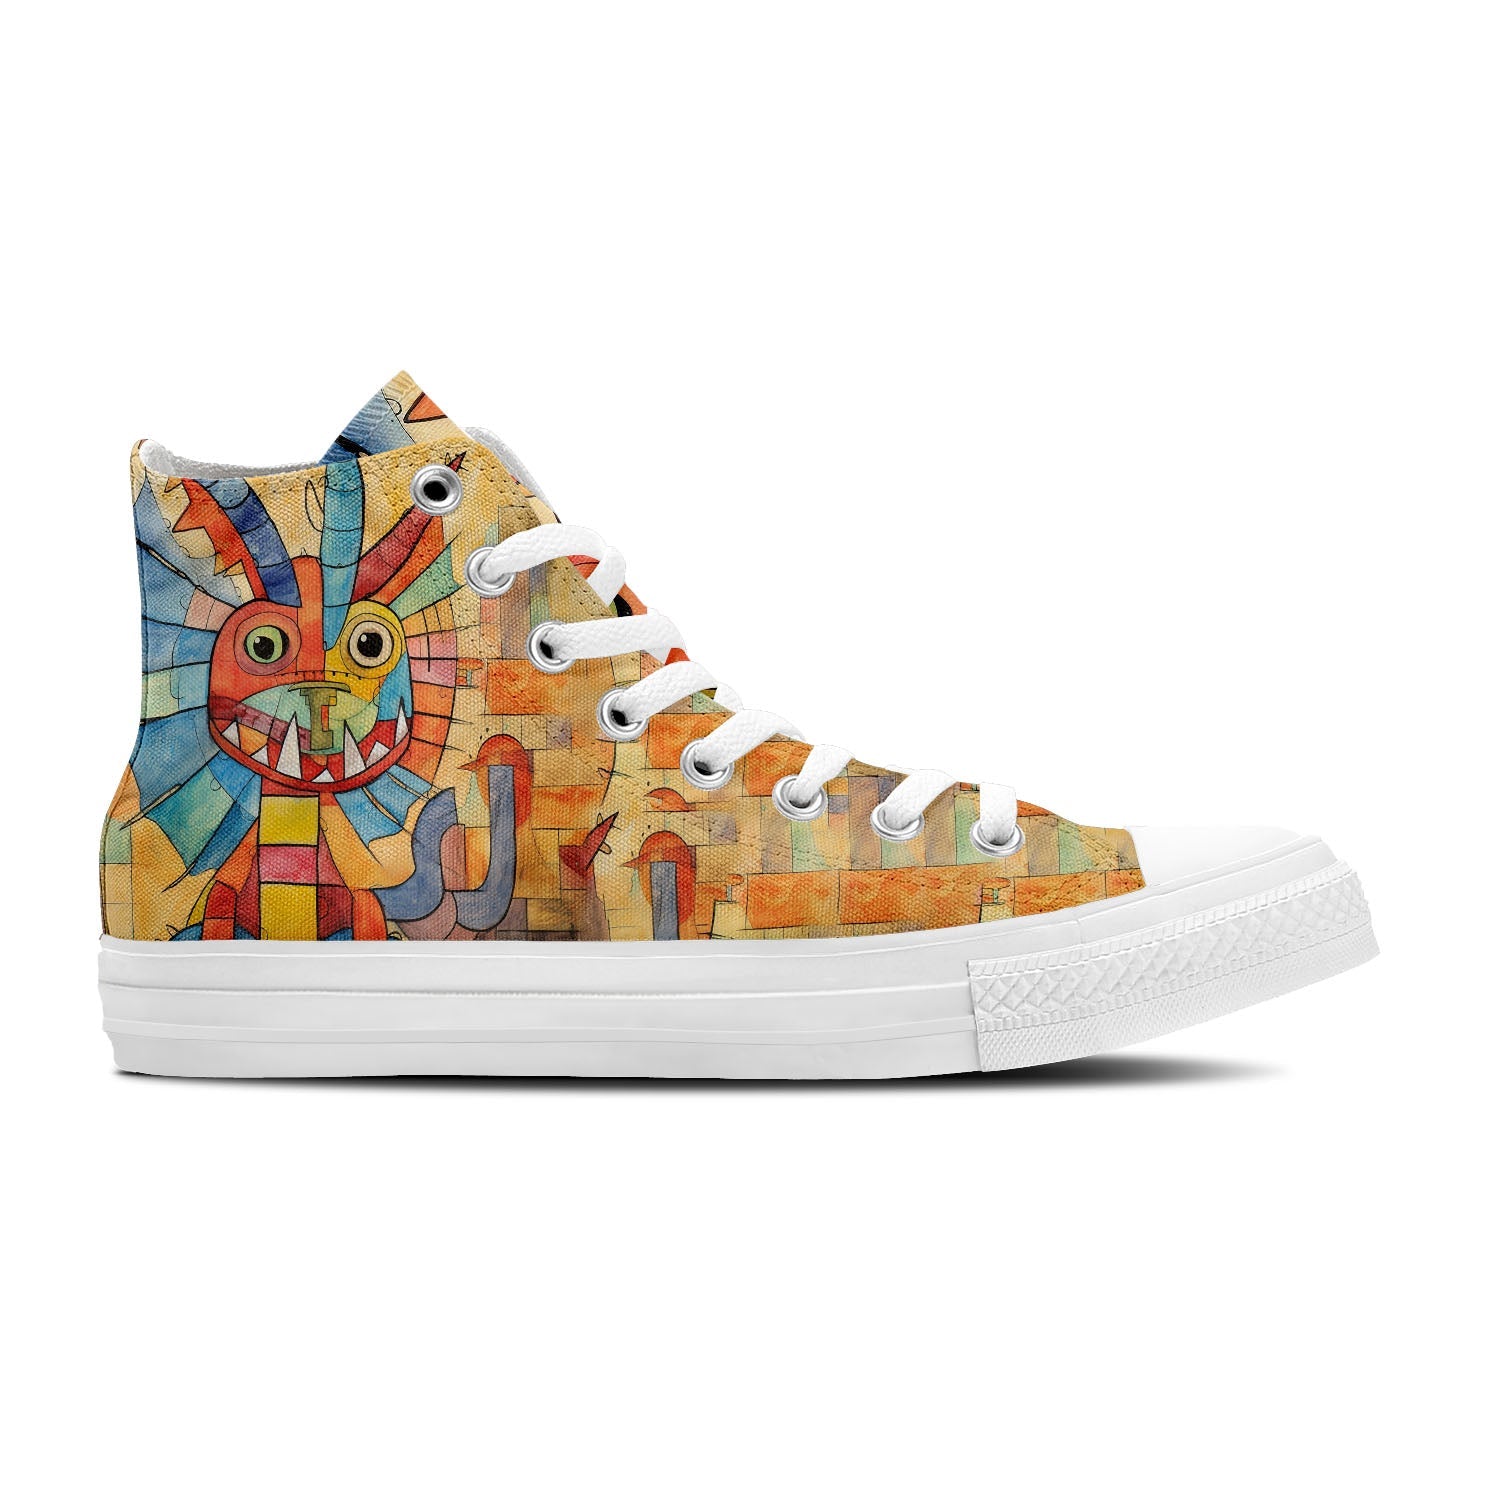 Odyssey of the Ancients: Men and Women's Mid-Top Canvas Shoes - Elevate Your Style with Central-High Canvas Shoes Featuring the Whimsical Wonders of Artistic Dinosaur Artistry